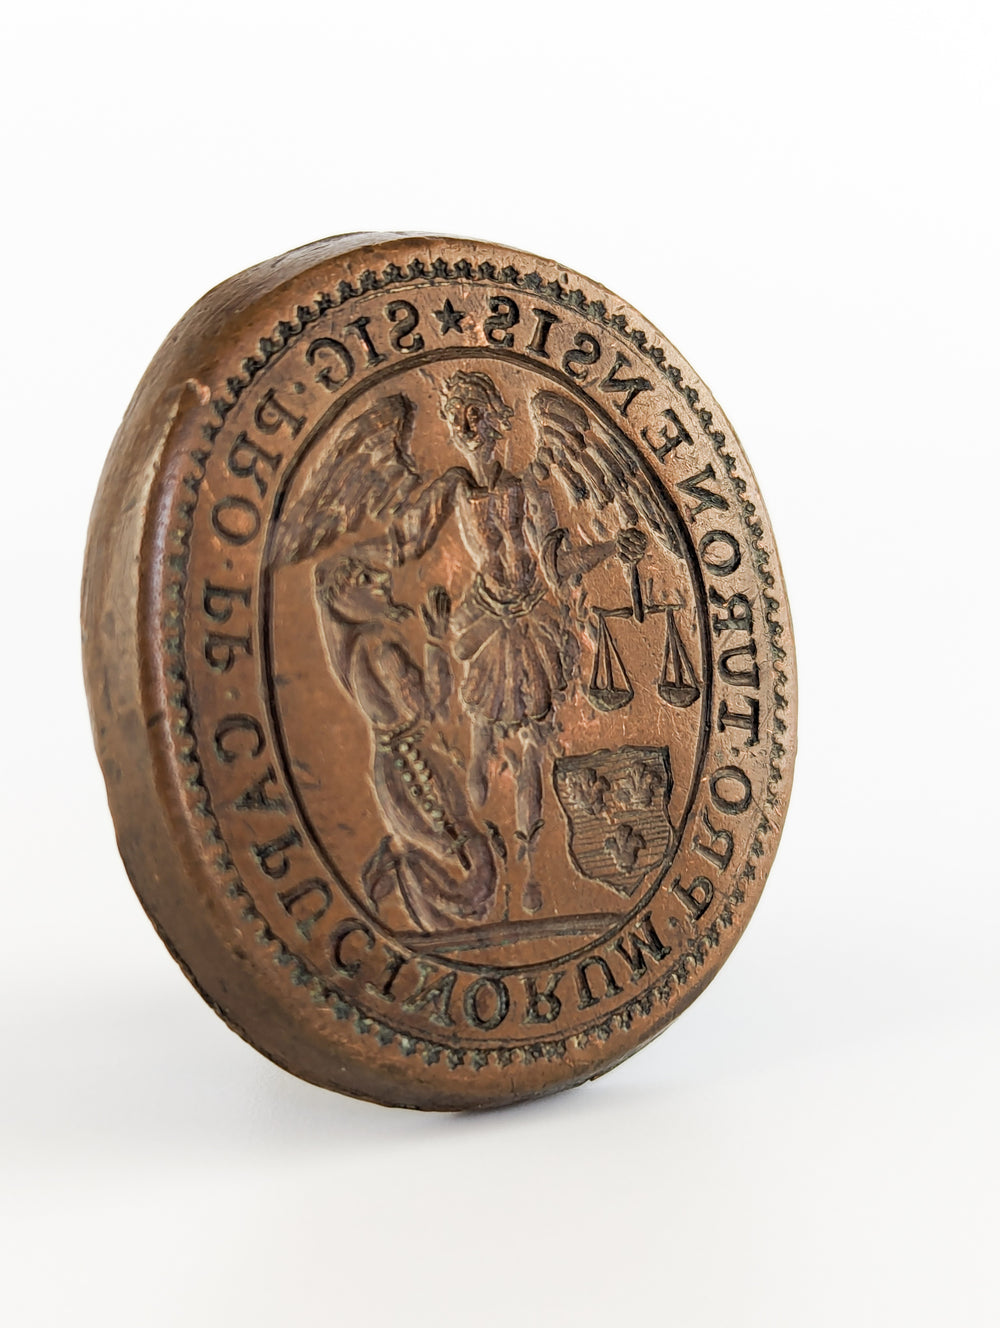 17thc Copper Seal of the Capuchins of Tours, Touraine